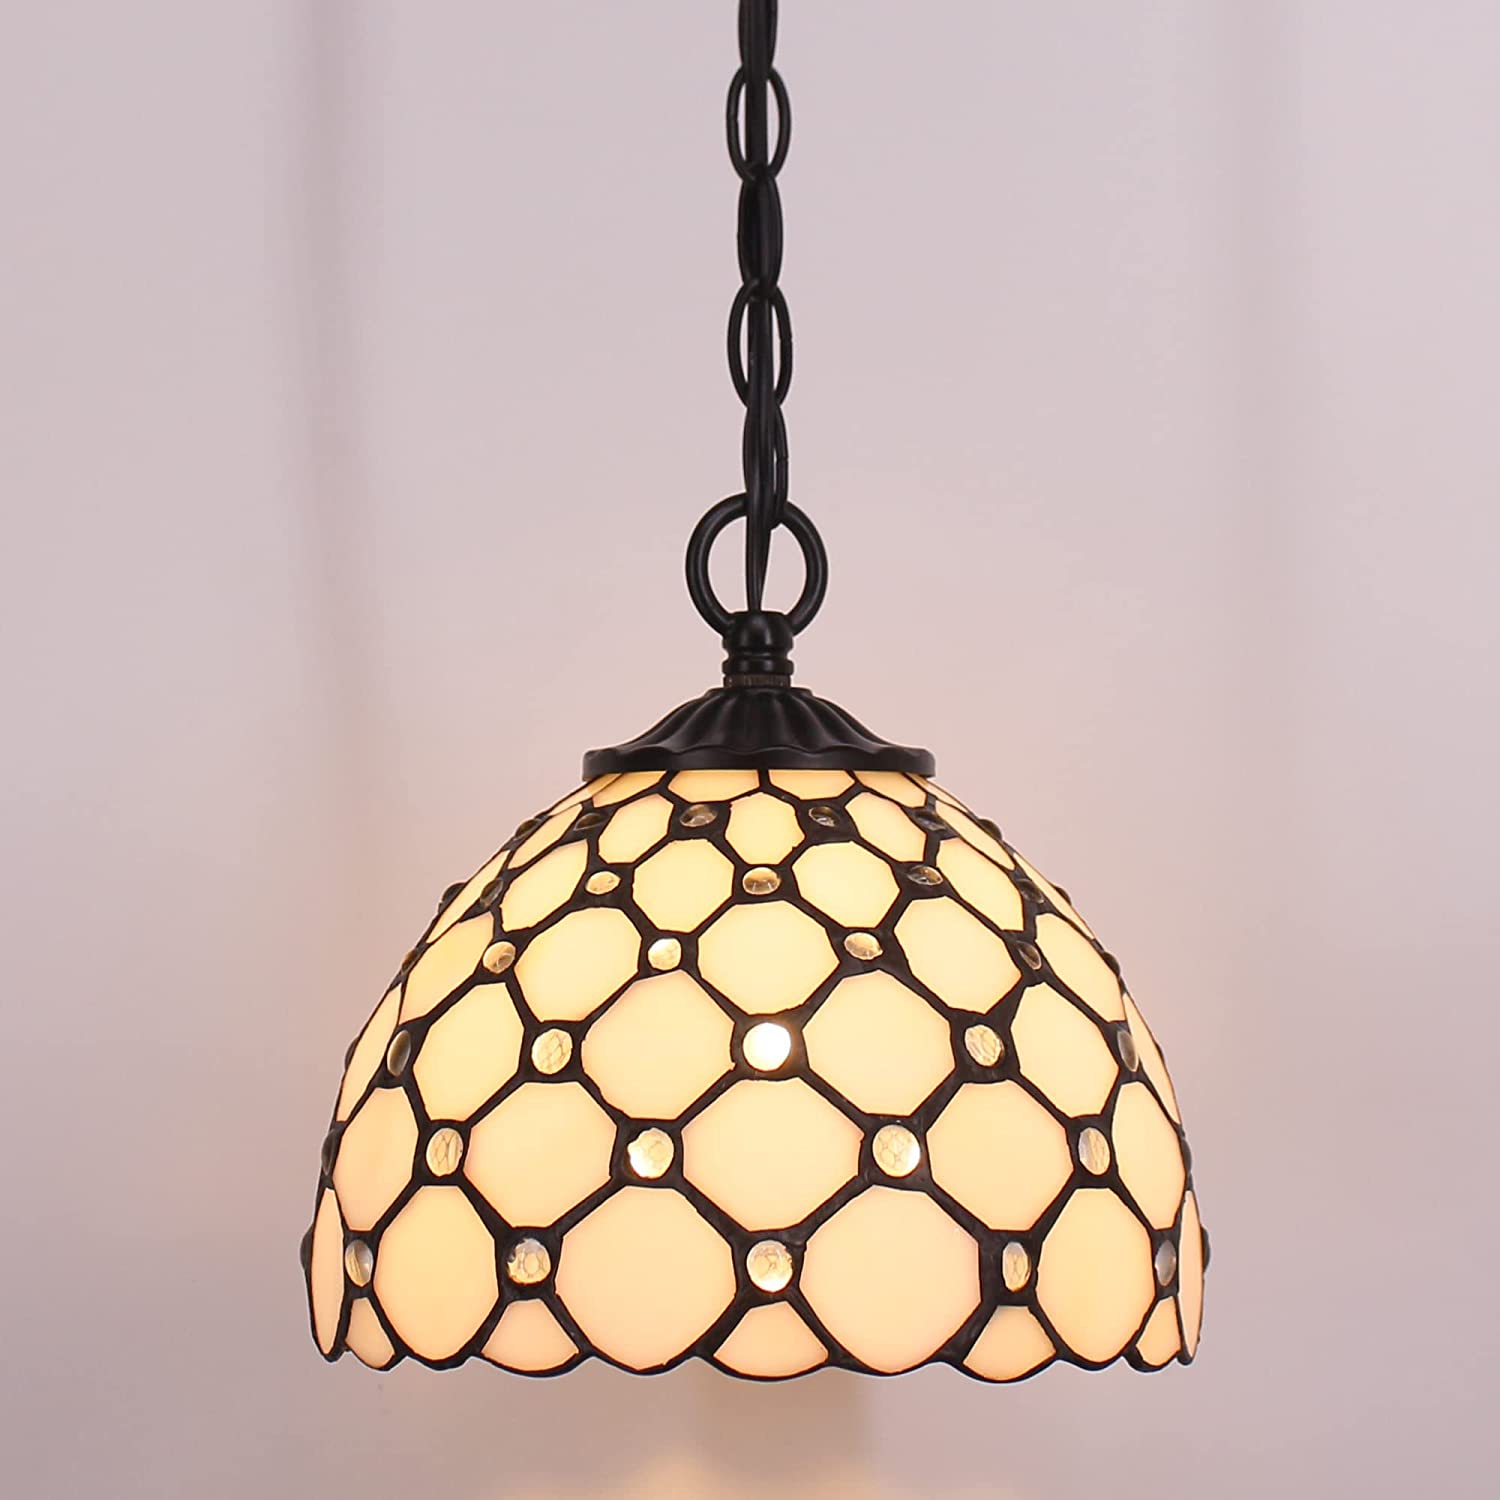 Werfactory® Tiffany Pendant Light with W8H7 Inch Crystal Beads White Stained Glass Hanging Lamp